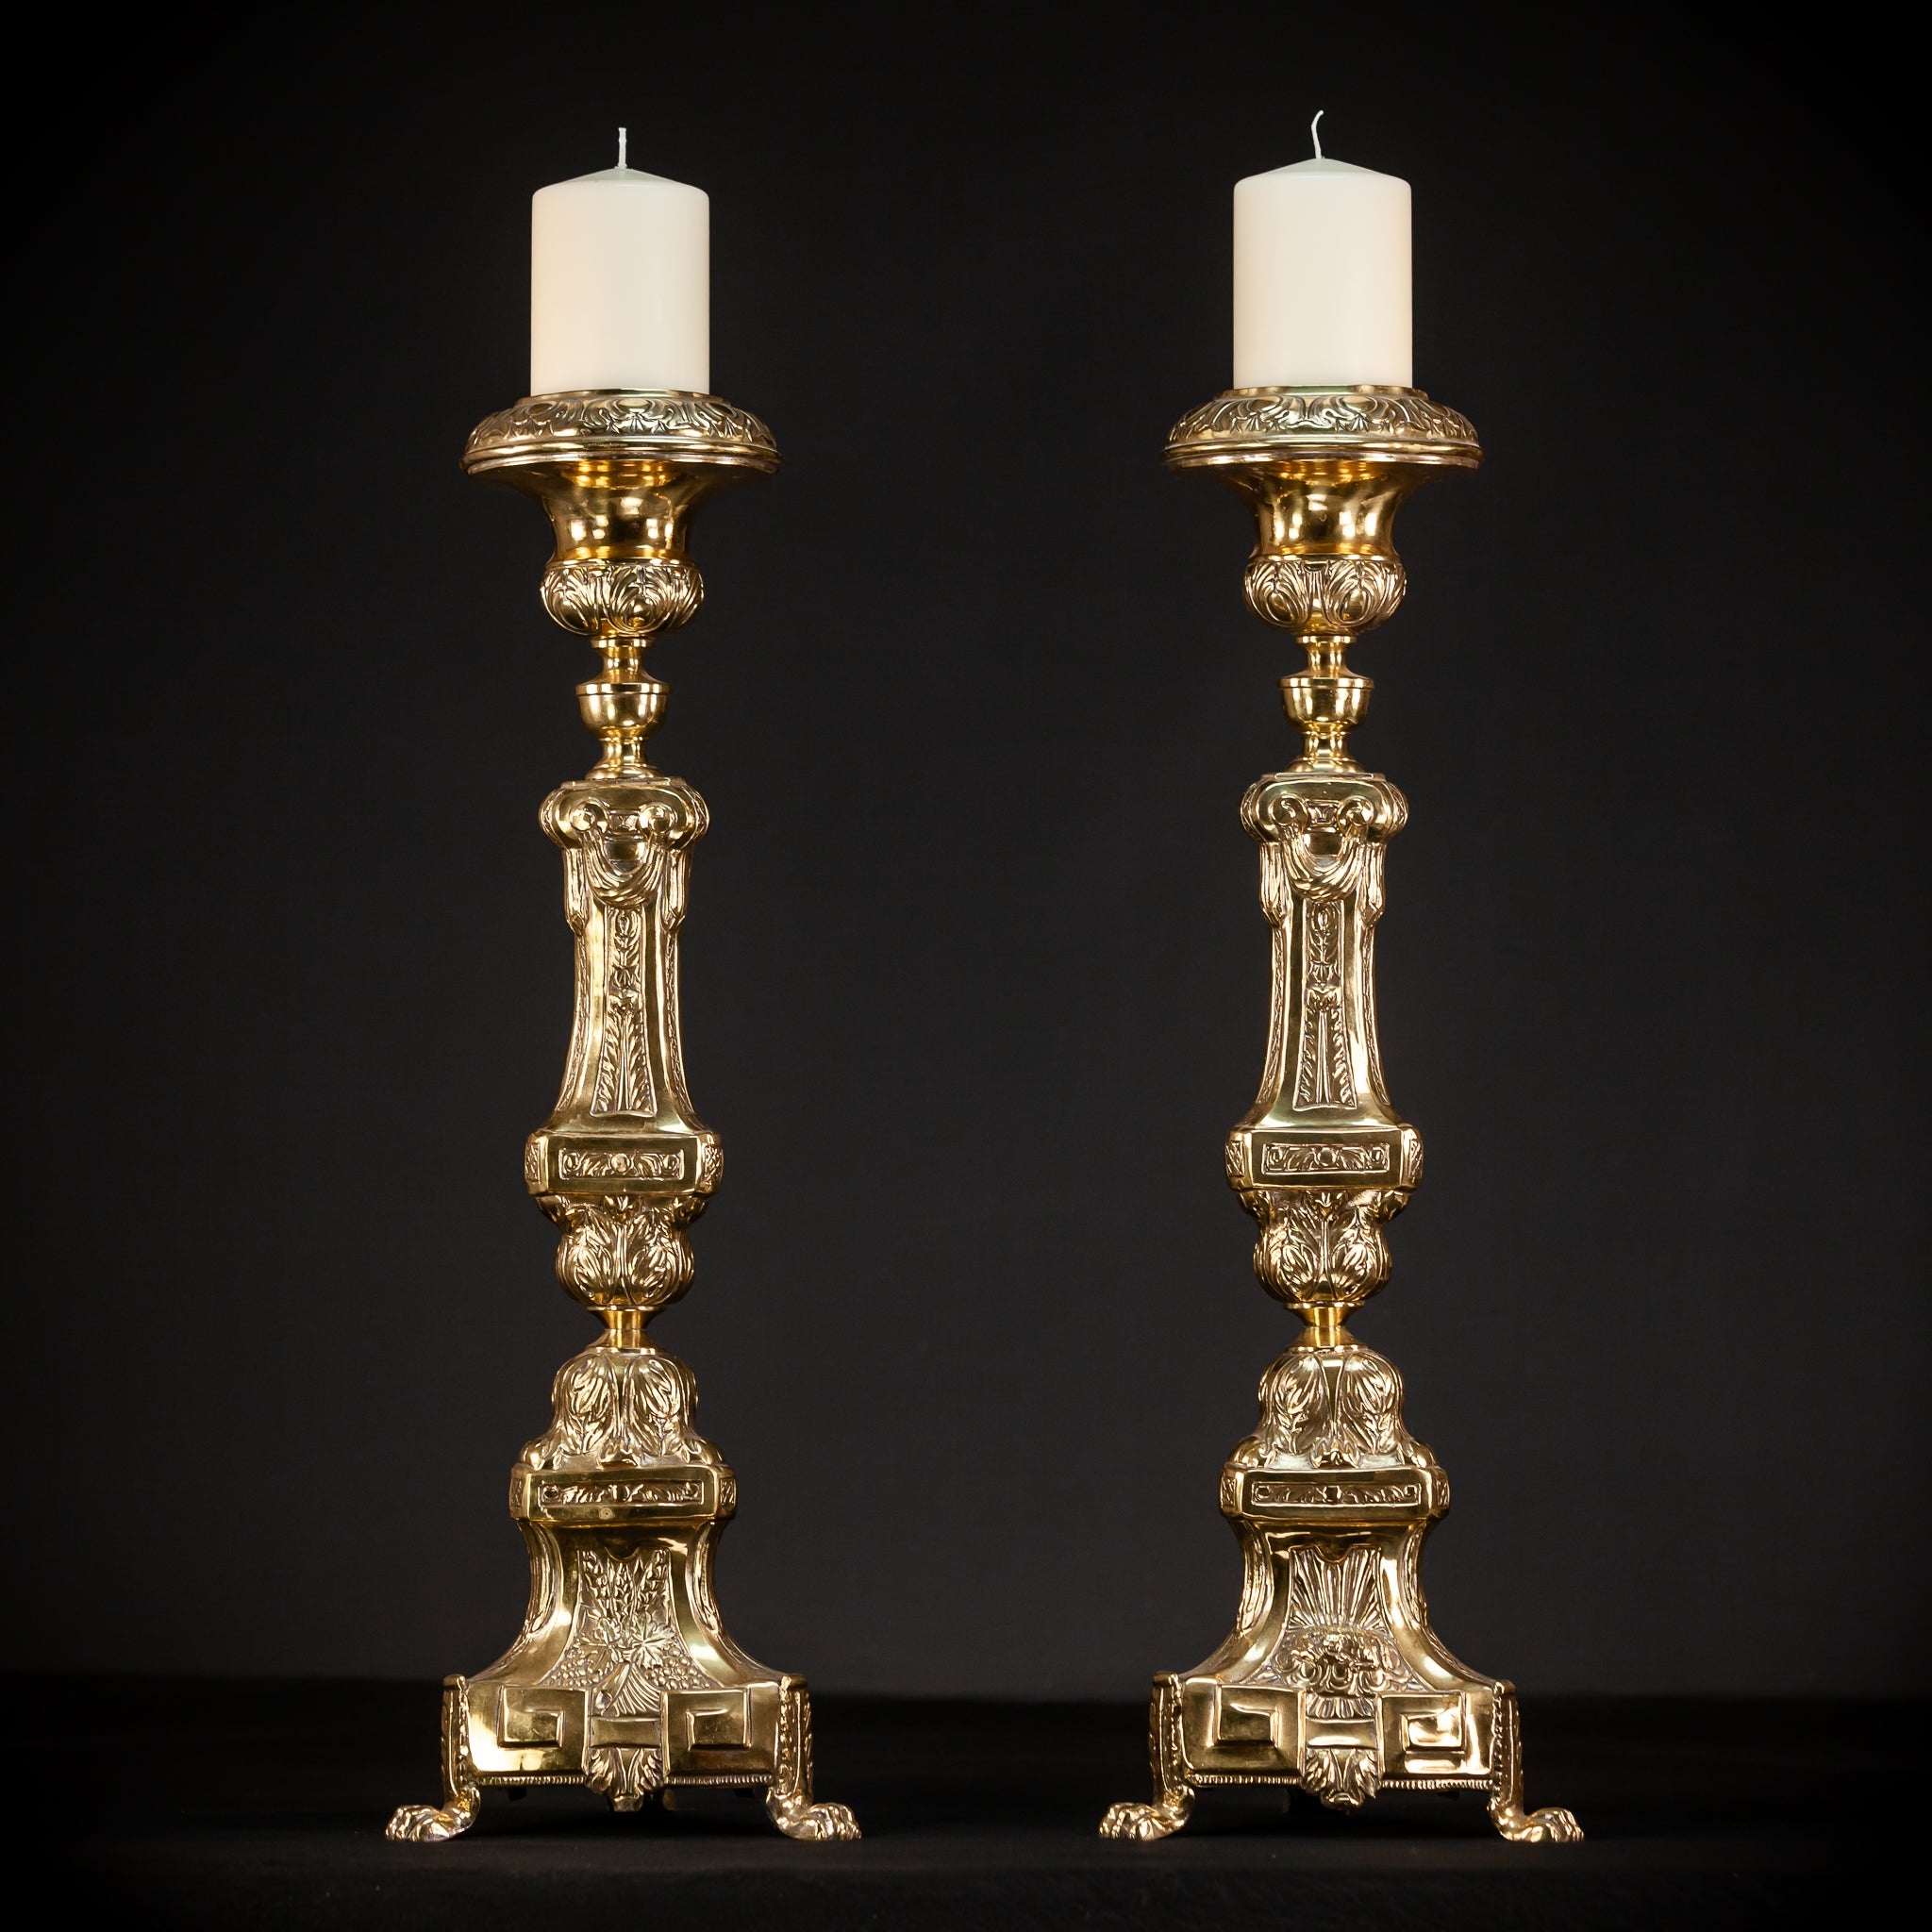 Pair of French Baroque Candlesticks | 1700s Antique | 26" / 66 cm